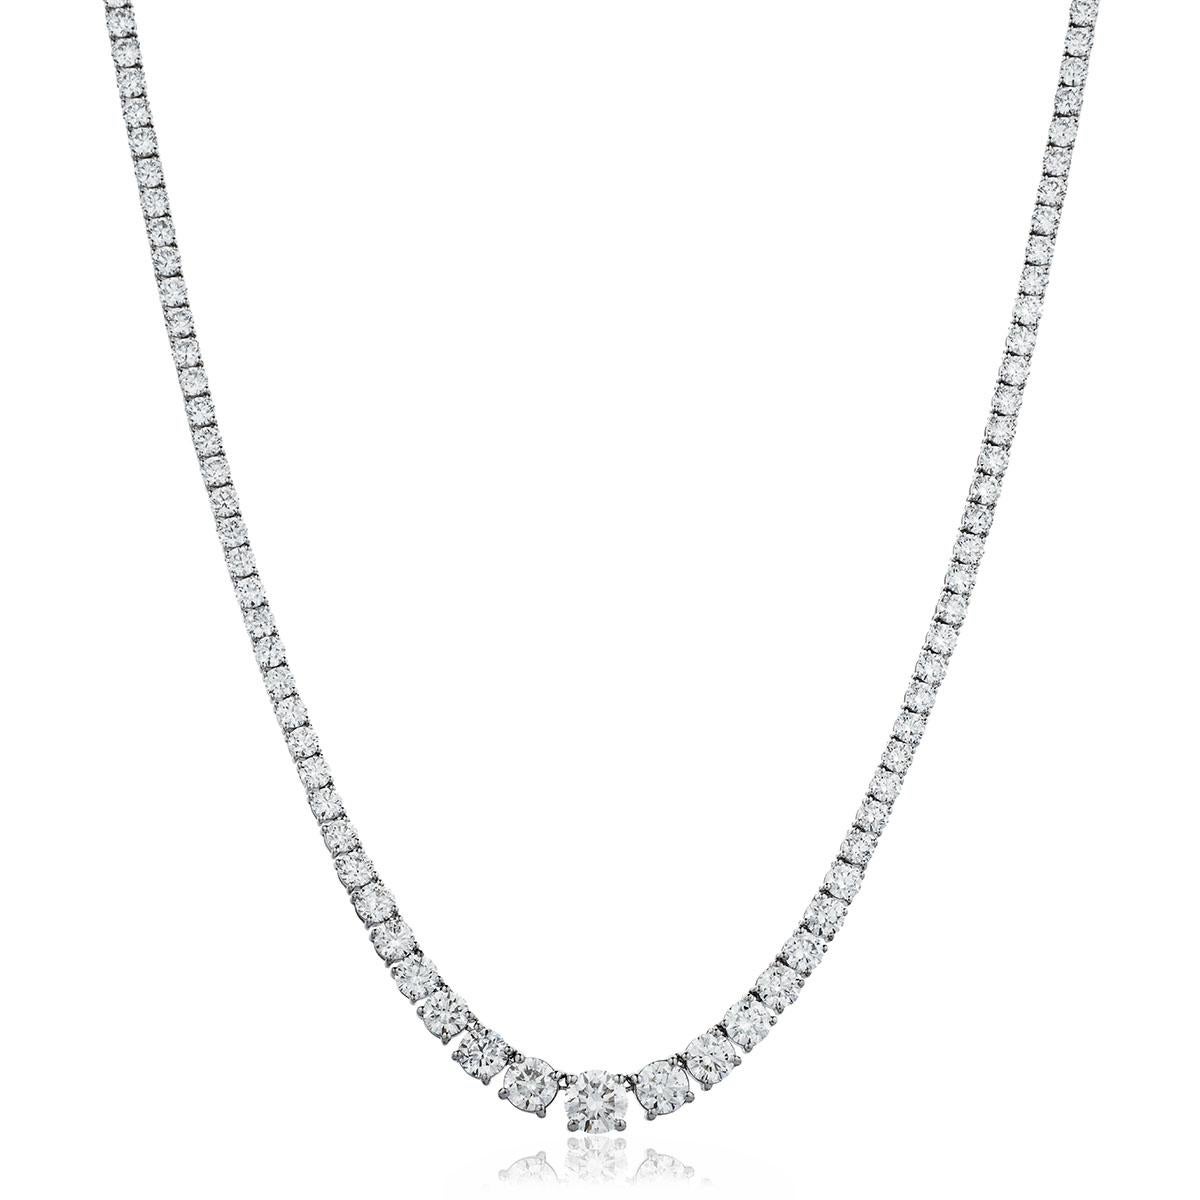 8 Carat Diamond Tennis Line Necklace 18 Karat White Gold 4 Claws Set Riviera In New Condition For Sale In London, GB